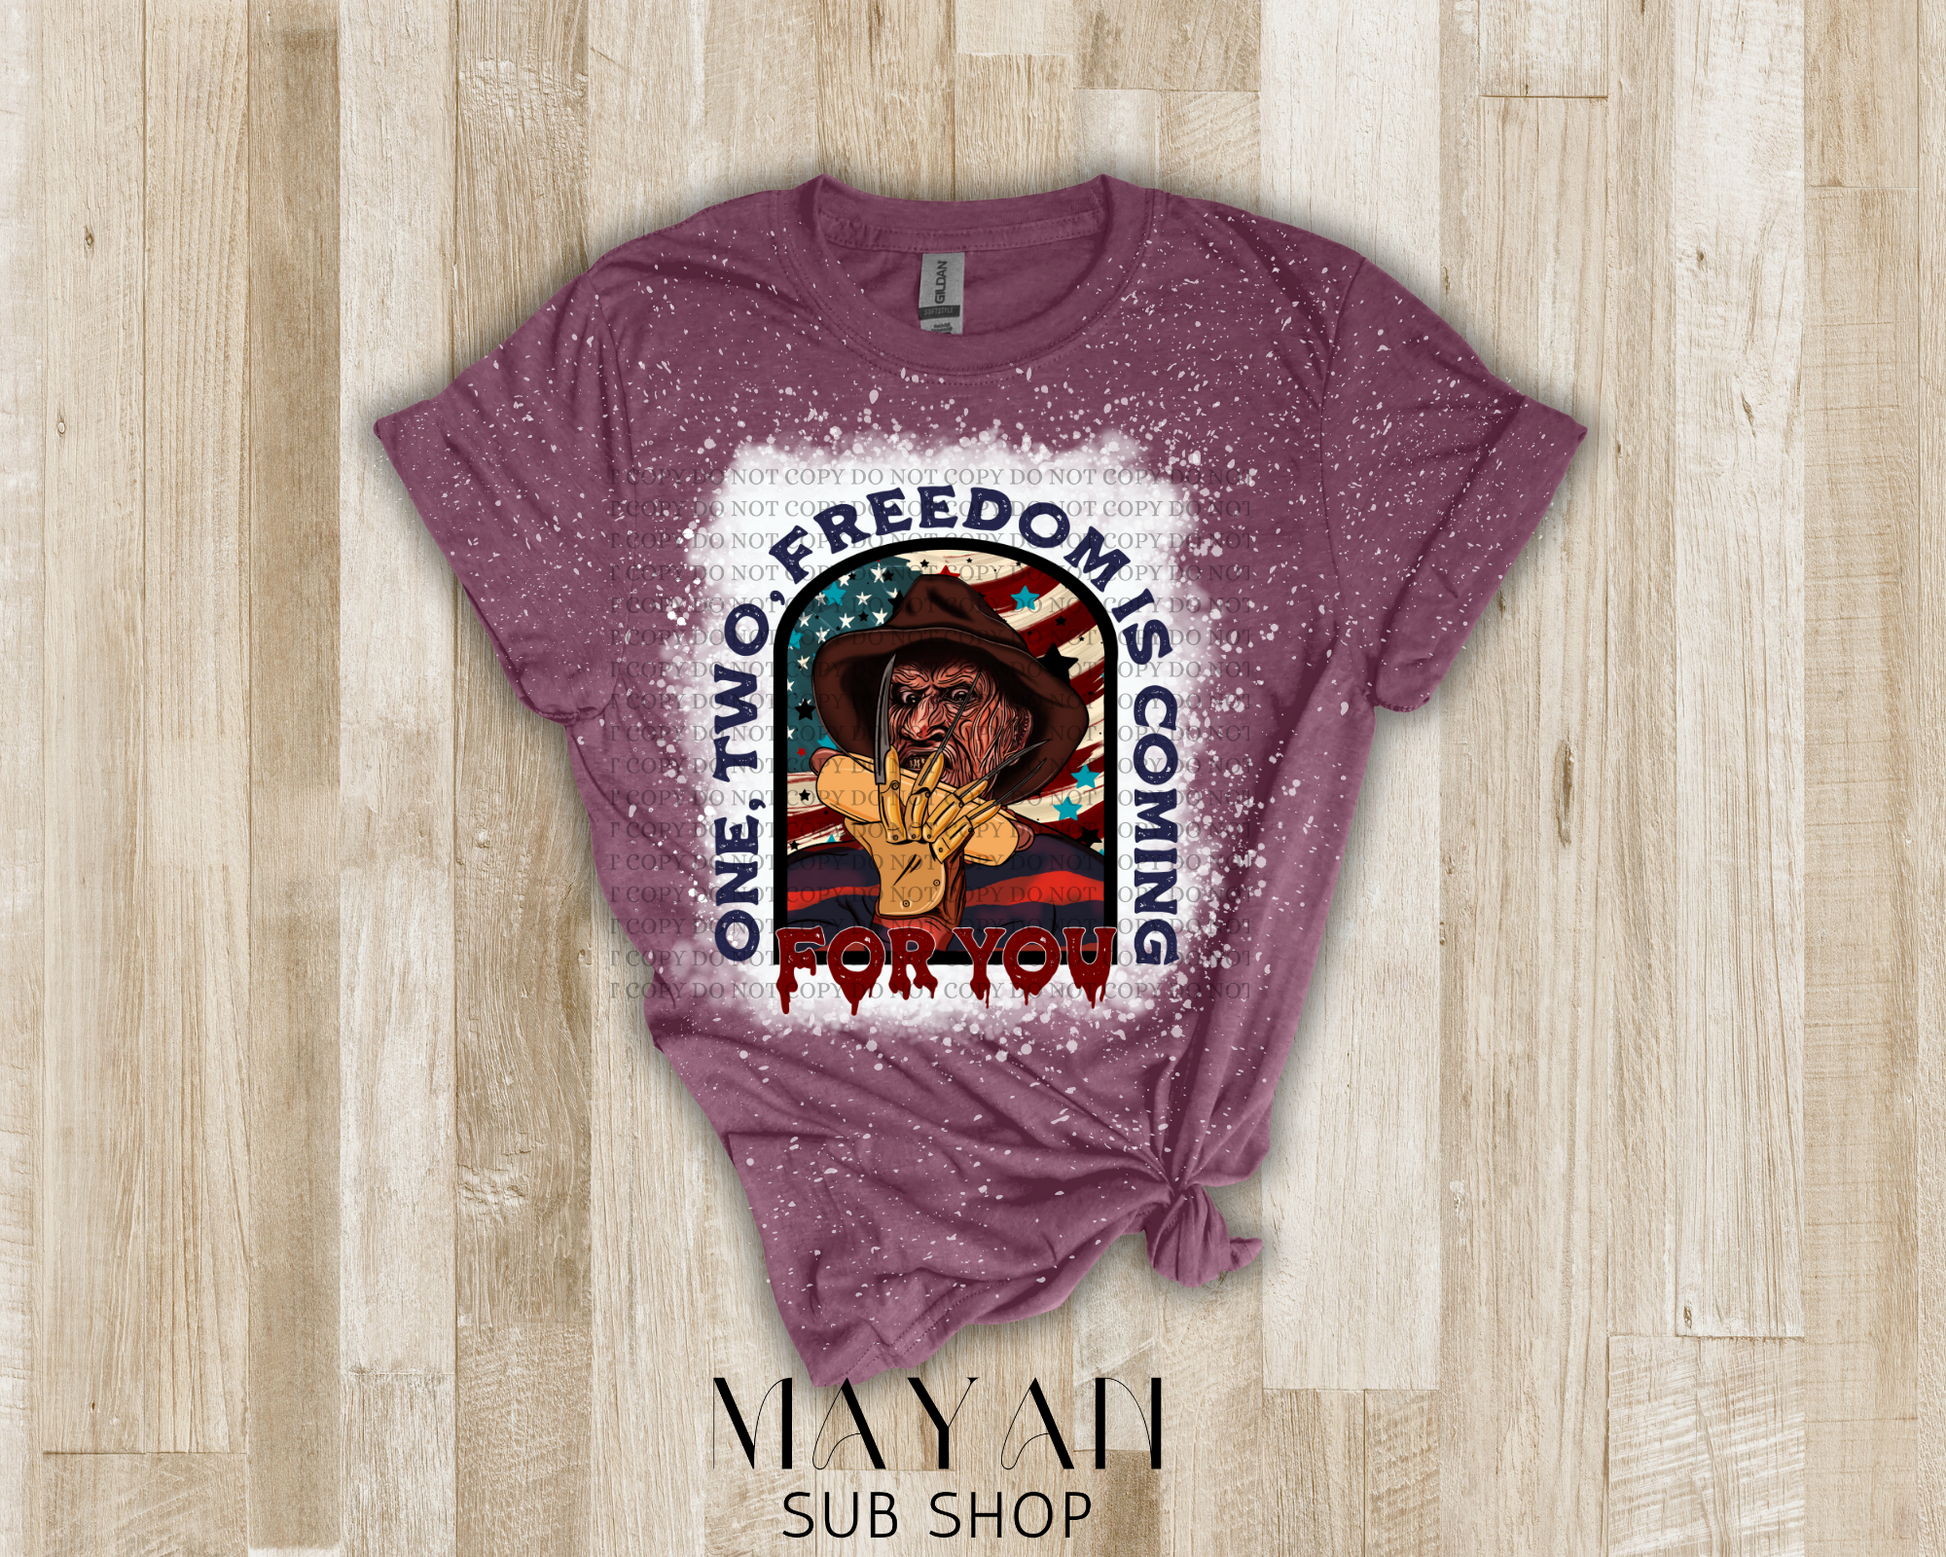 Freedom is coming bleached shirt - Mayan Sub Shop